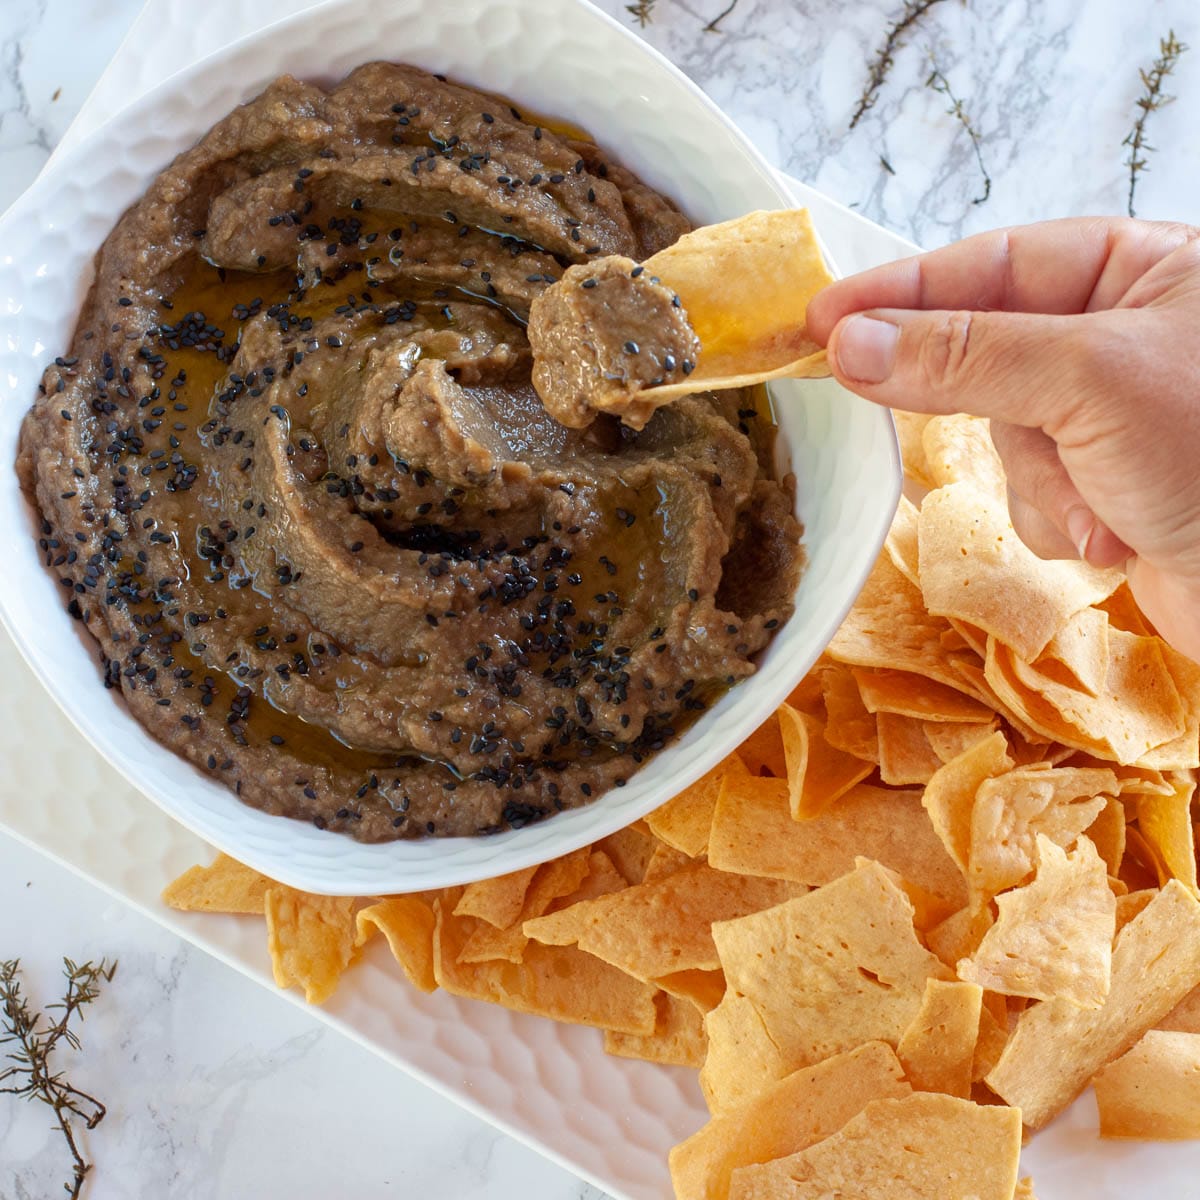 Socca chips dipping into the aubergine caviar